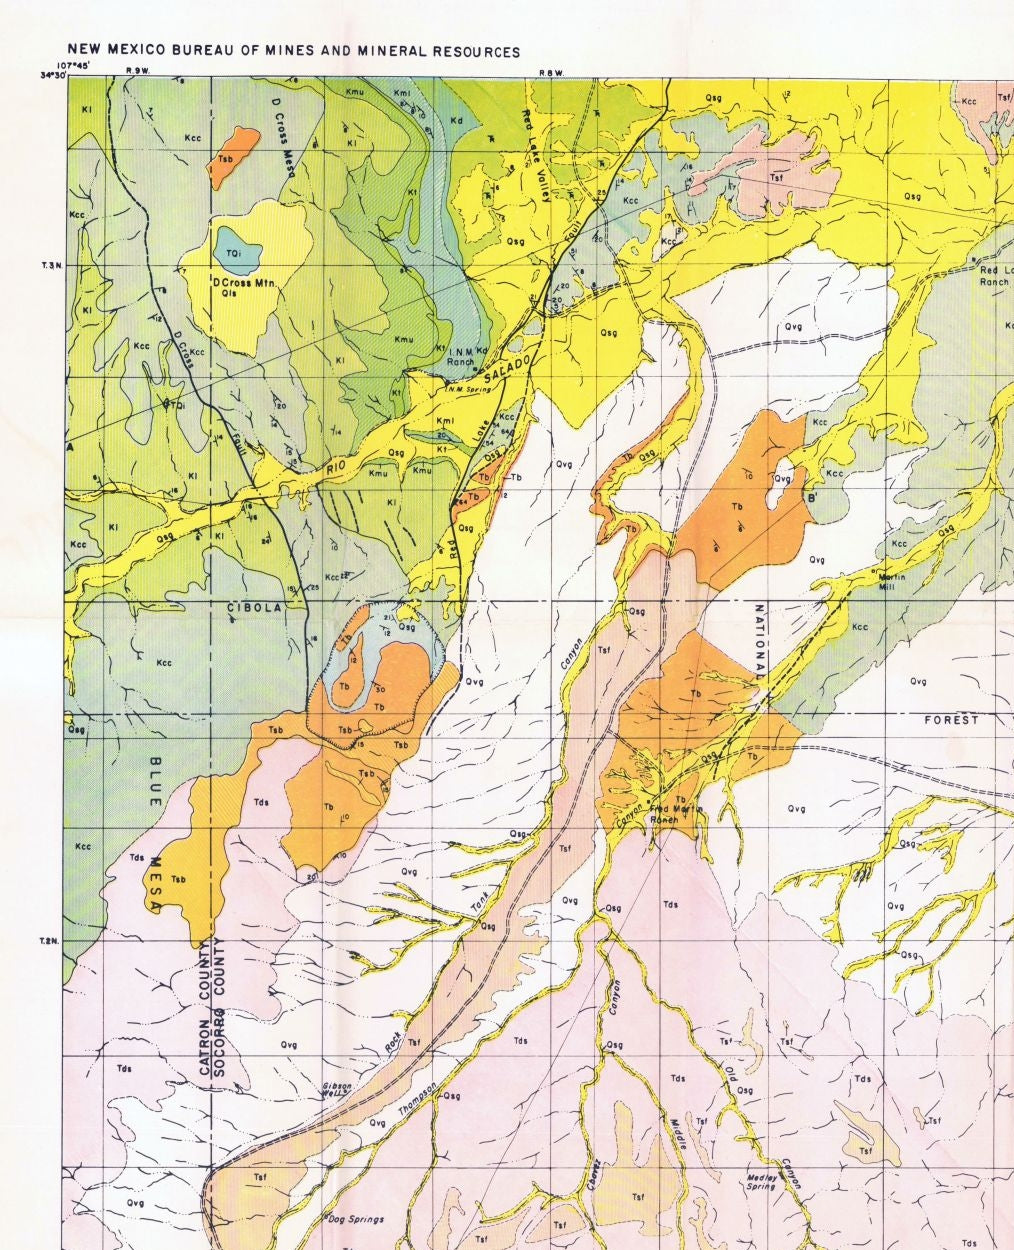 Historic Mine Map - Dog Springs Quad New Mexico Mines - Givens 1952 - 23 x 28.34 - Vintage Wall Art